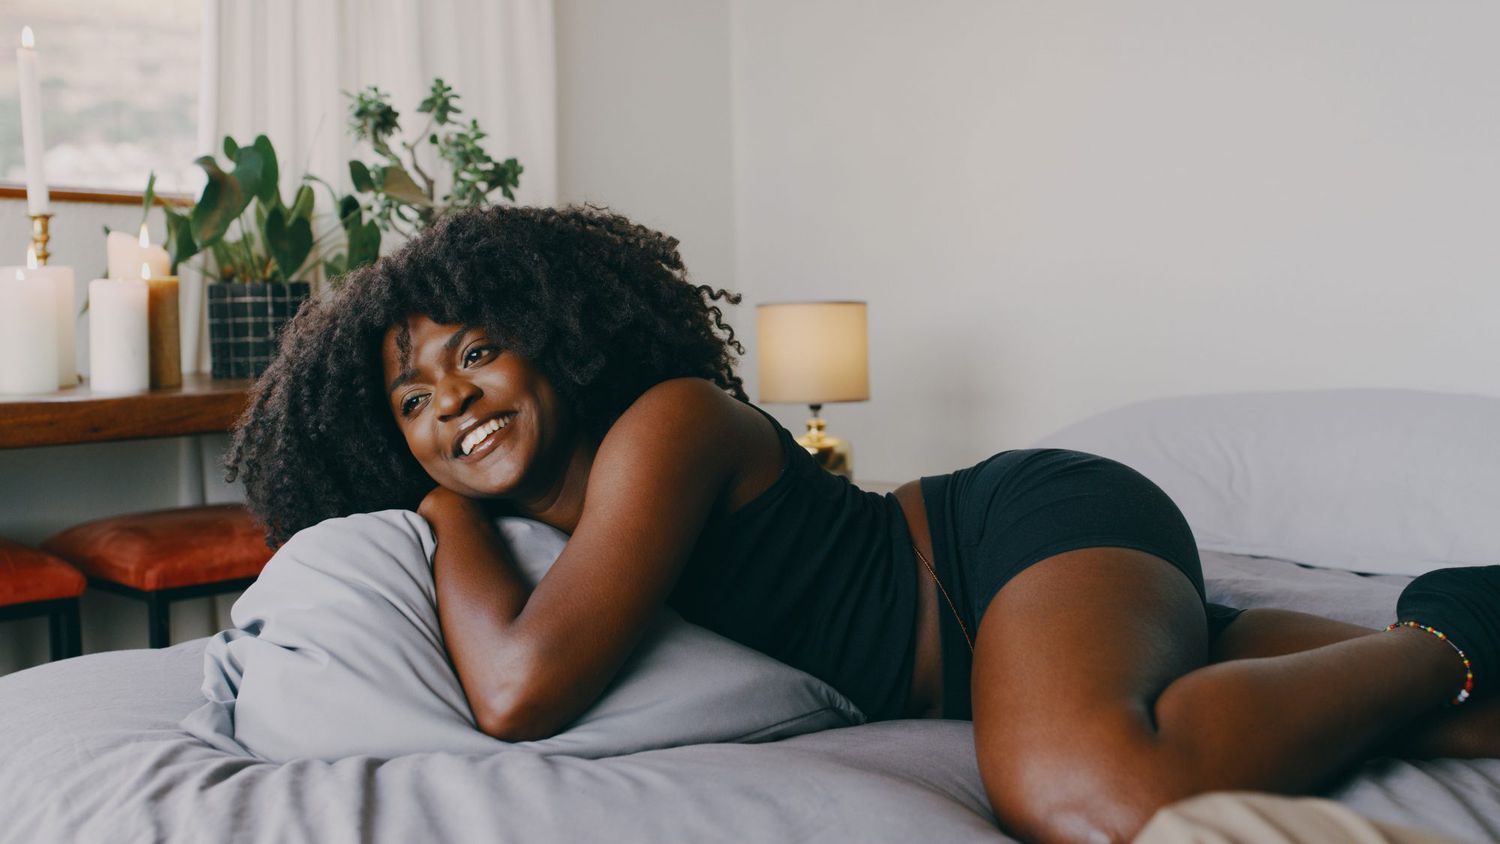 Smiling_Woman_In_Bed_In_the_Morning